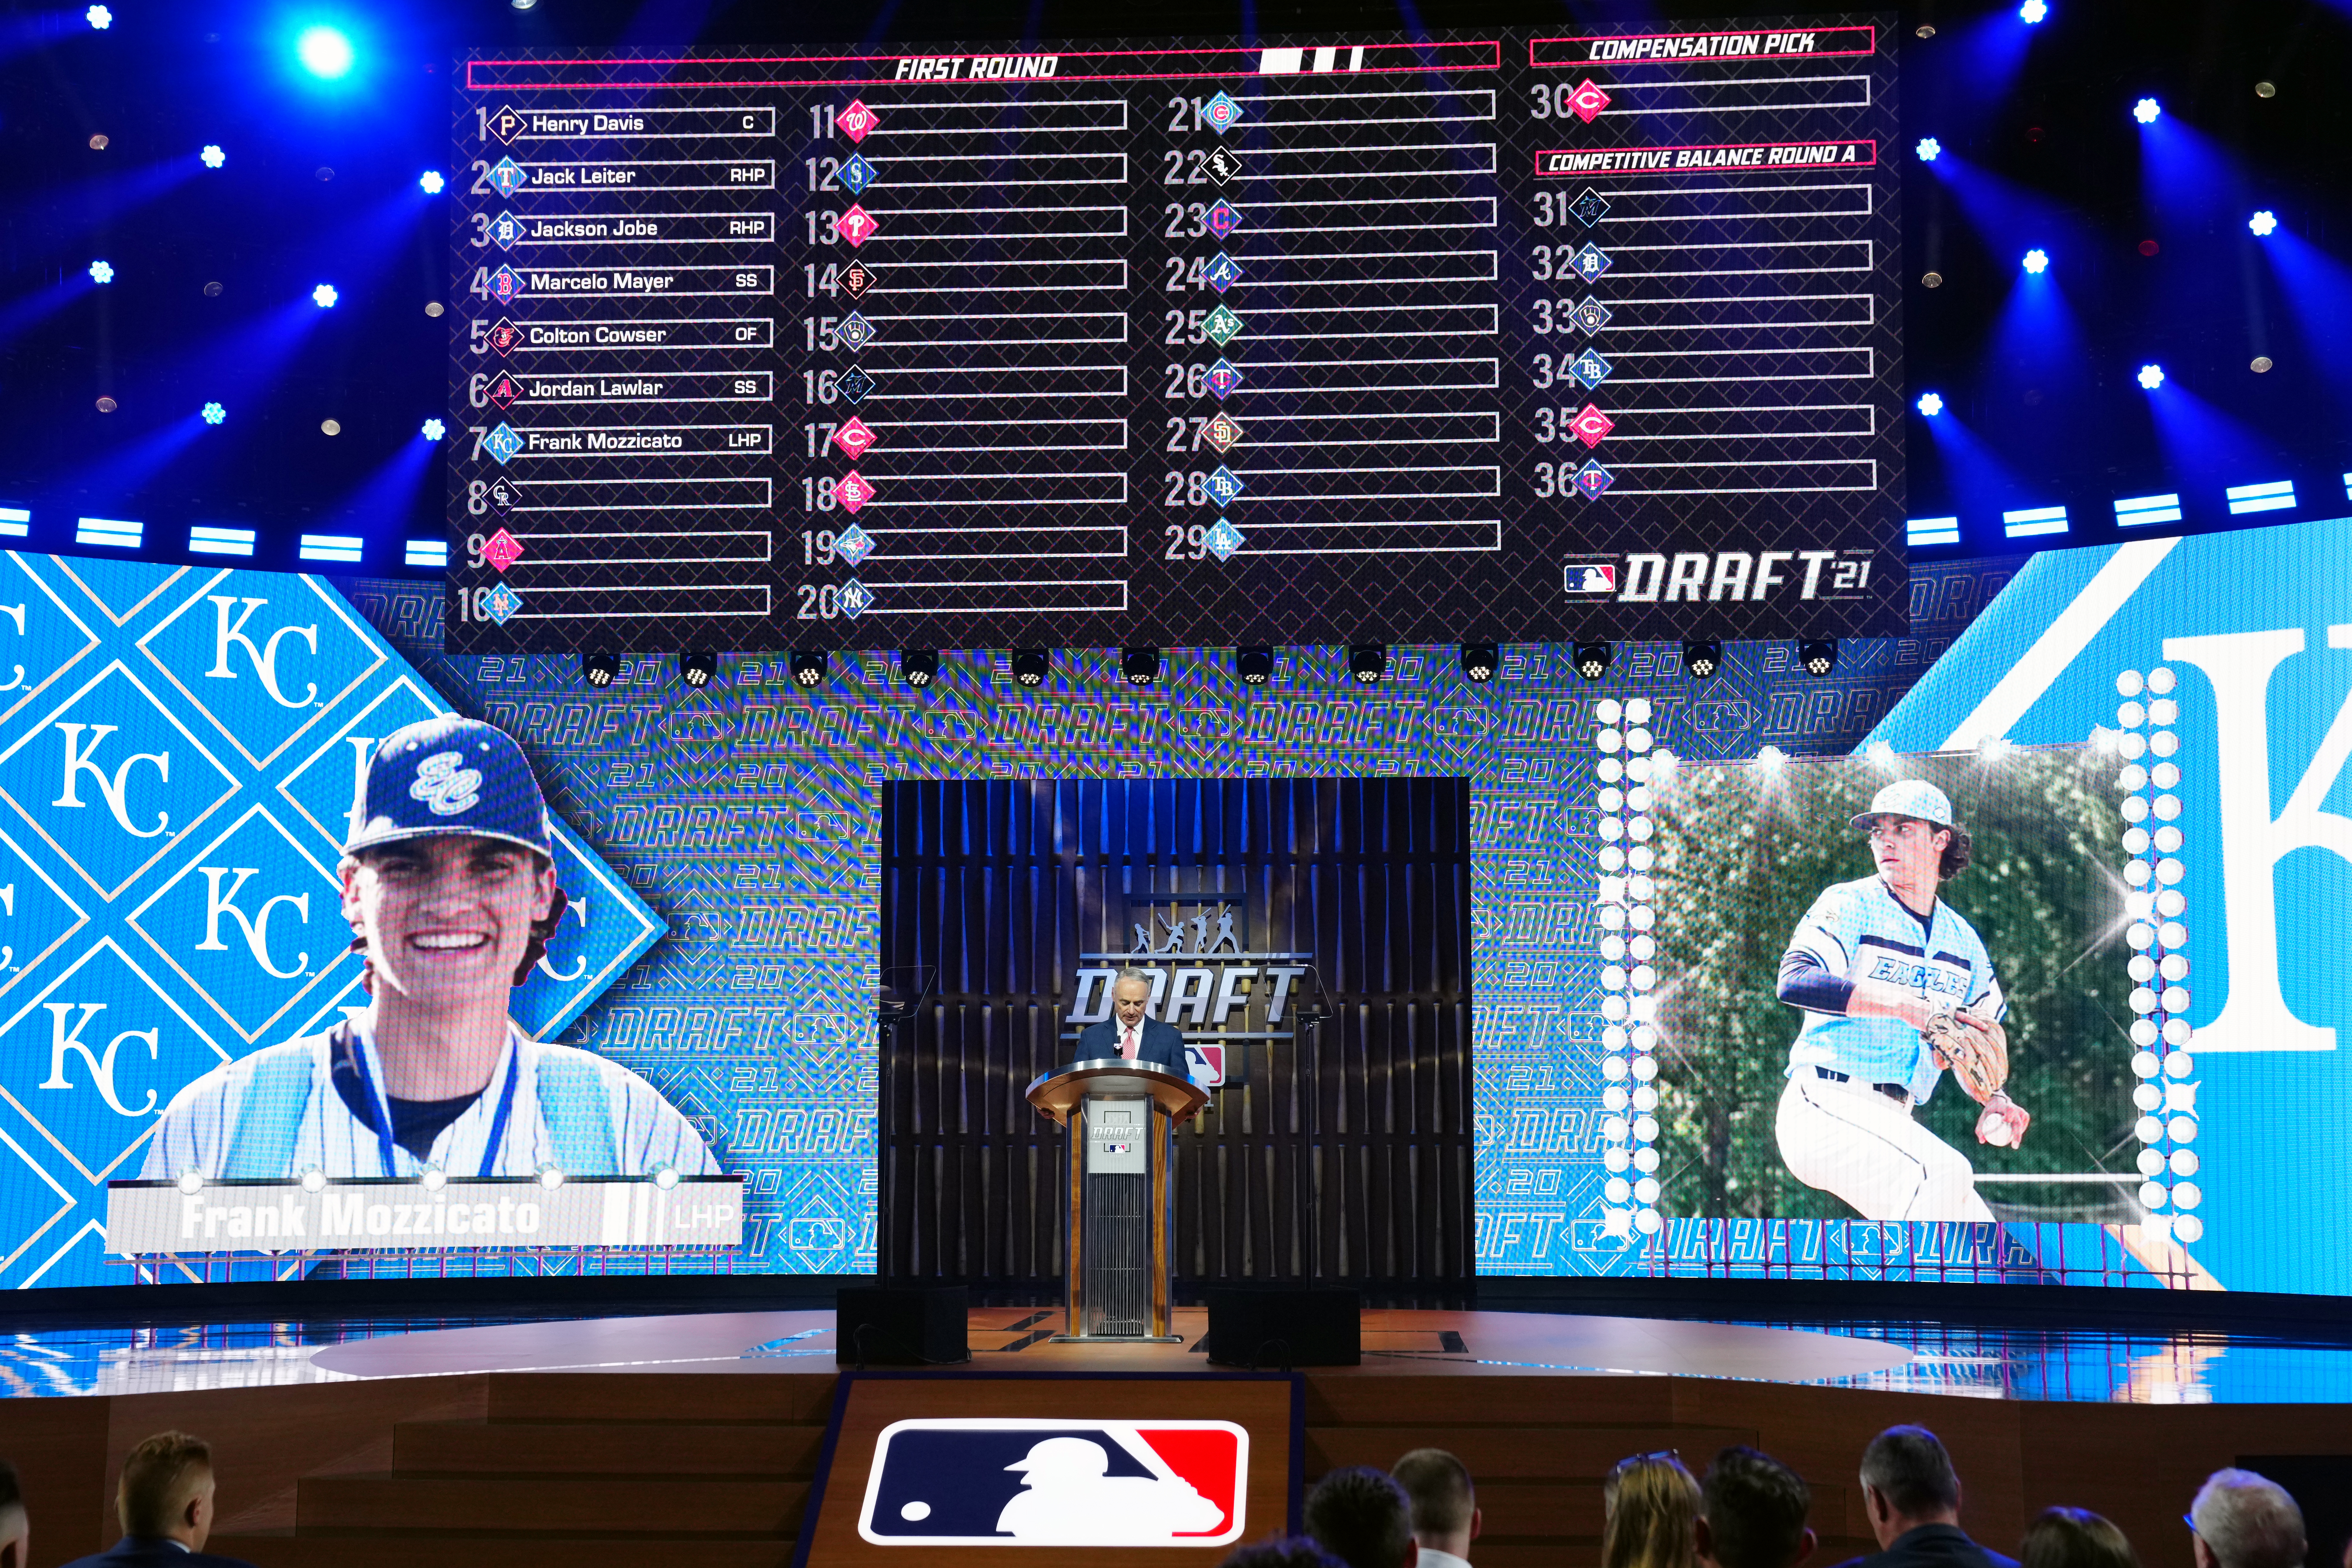 MLB Commissioner Rob Manfred announces Frank Mozzicato as the seventh overall pick for the Kansas City Royals during the 2021 Major Leauge Baseball Draft at Bellco Theater at Colorado Convention Center on Sunday, July 11, 2021 in Denver, Colorado.